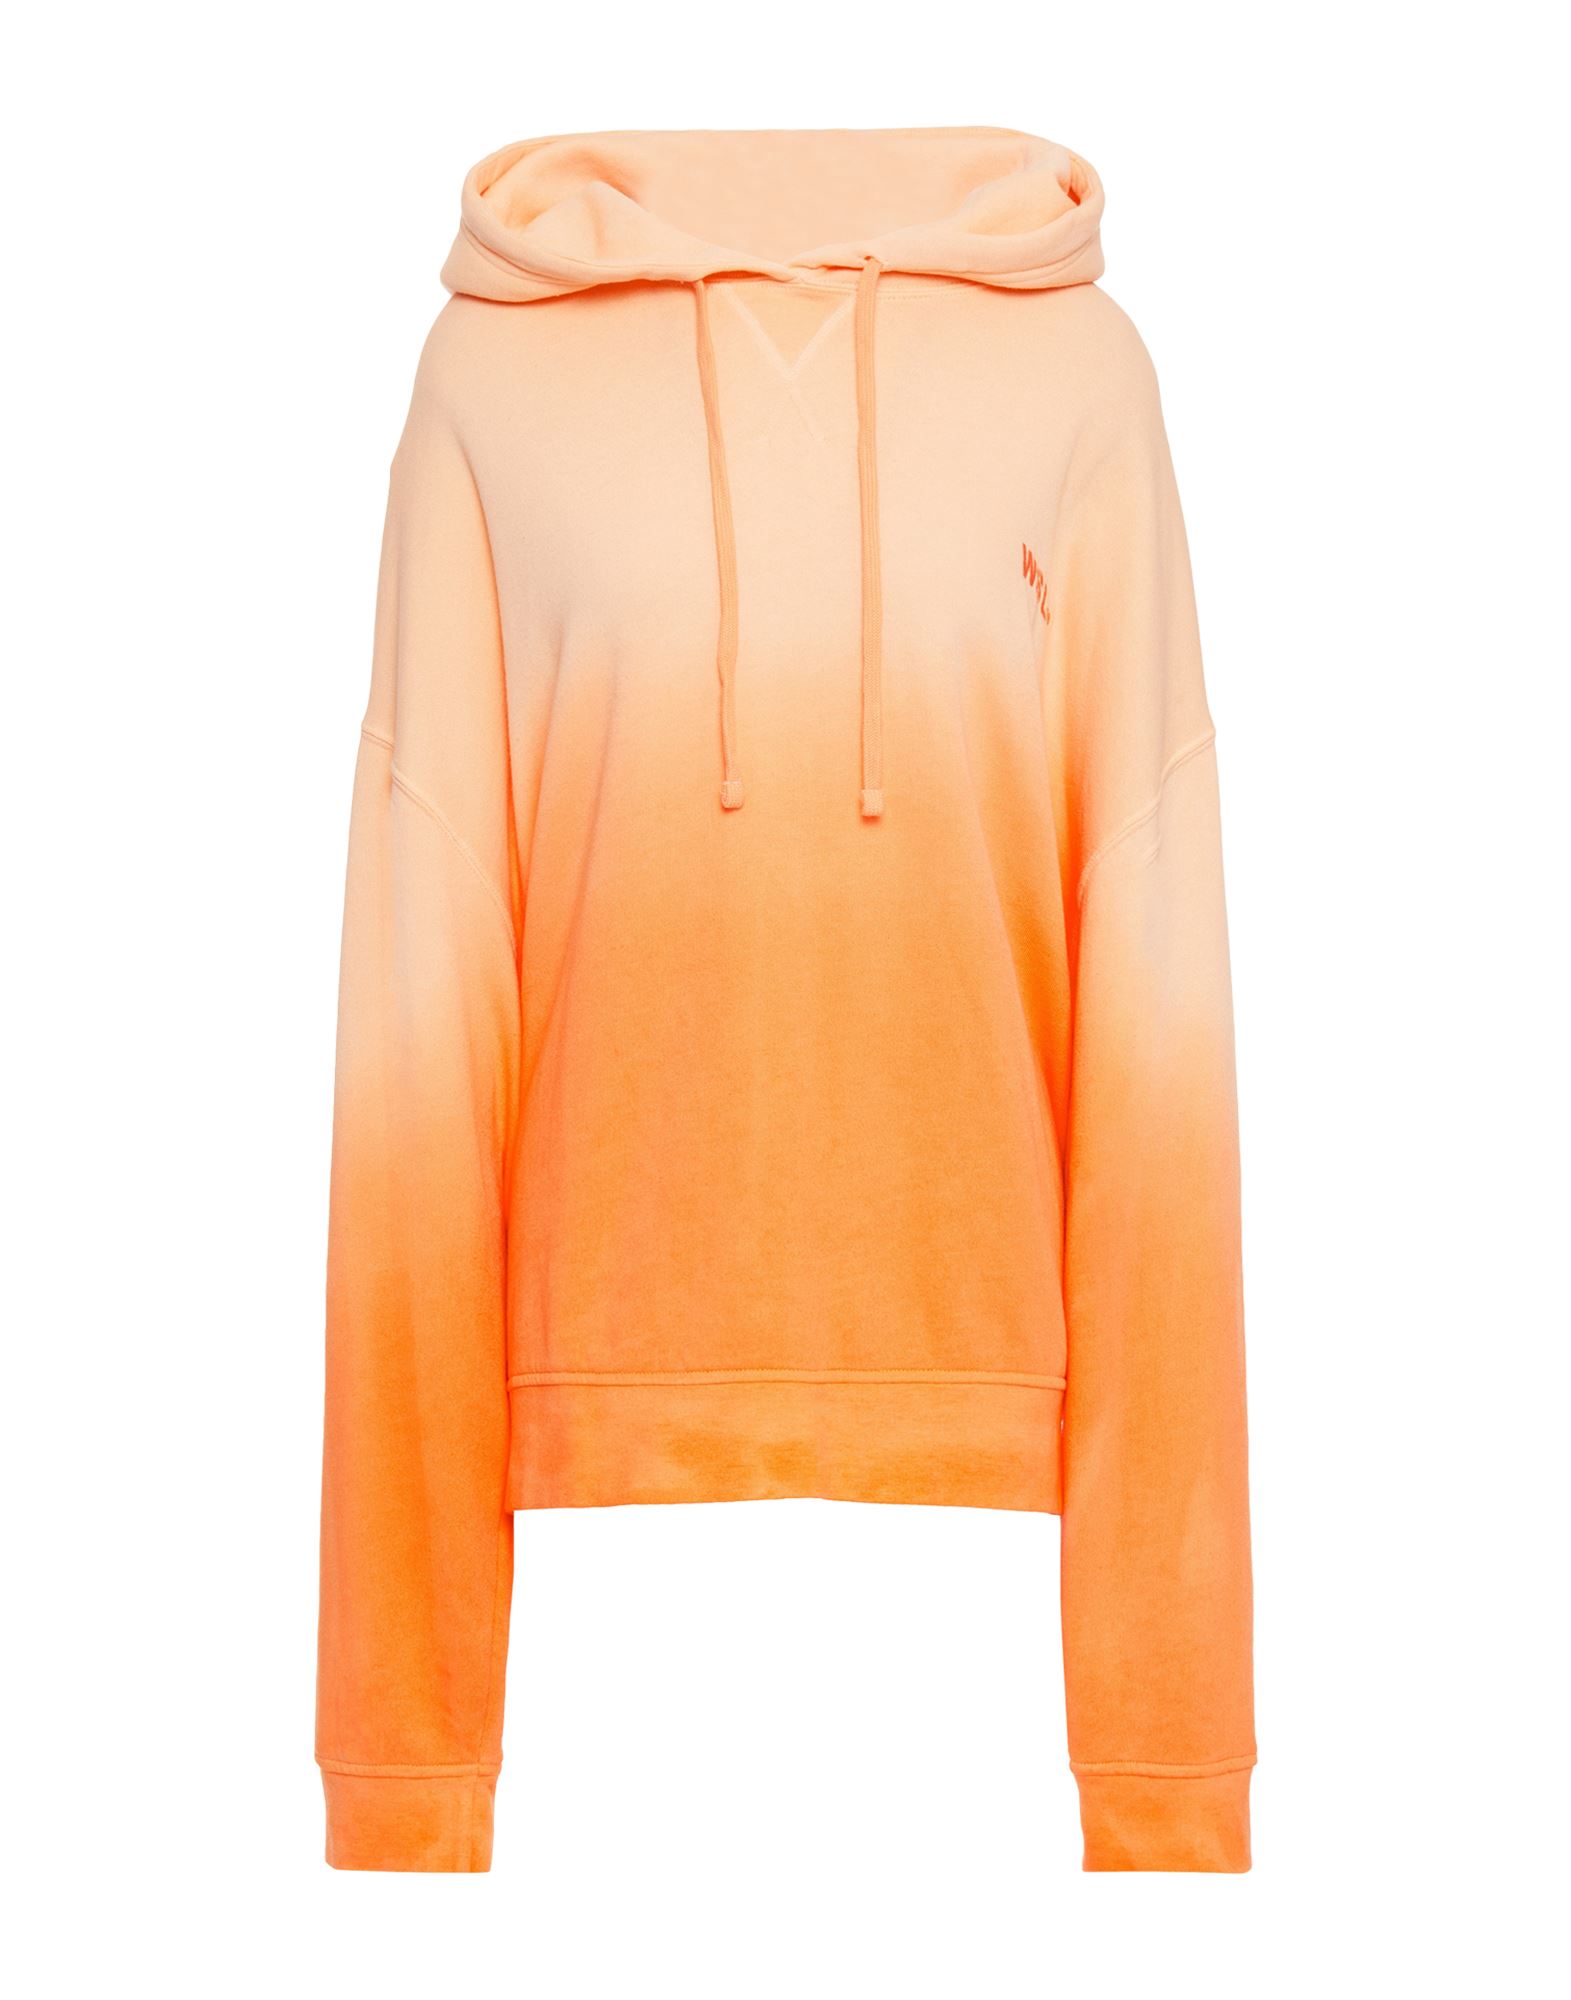 WSLY WSLY WOMAN SWEATSHIRT ORANGE SIZE L ORGANIC COTTON, RECYCLED POLYESTER, RECYCLED VISCOSE, ELASTANE